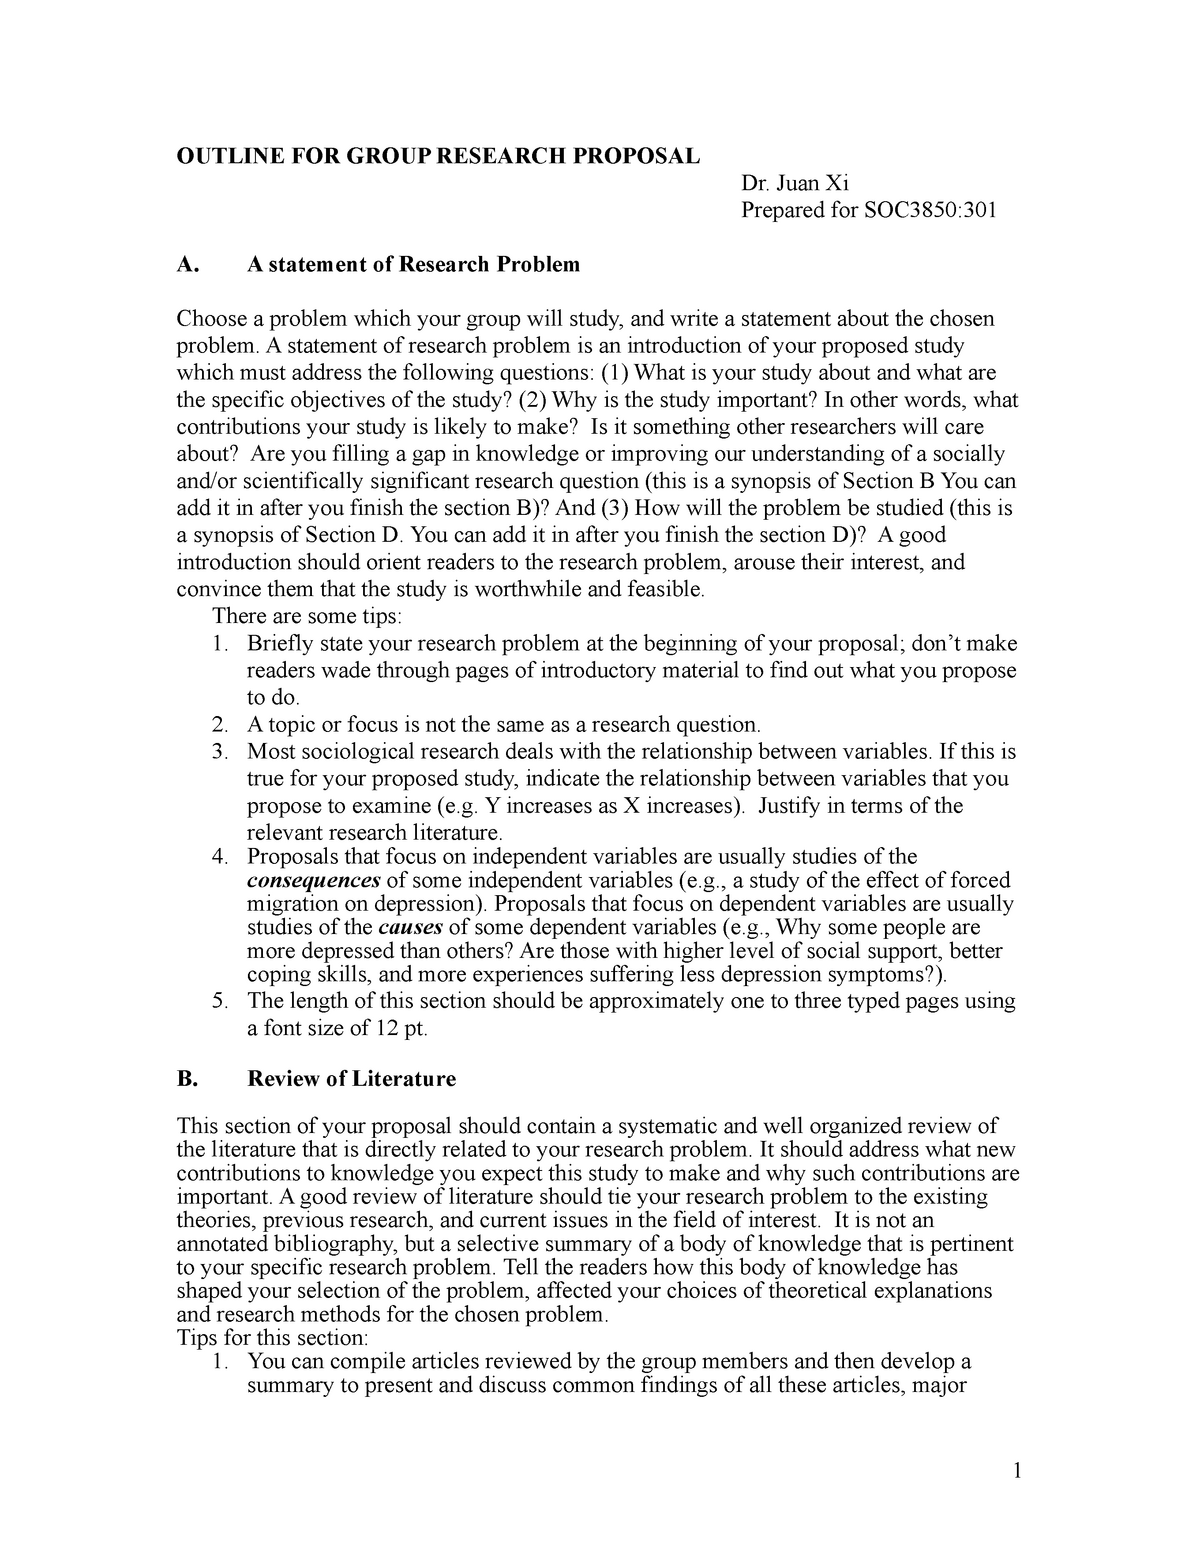 Outline FOR Group Research Proposal 1 - OUTLINE FOR GROUP RESEARCH ...